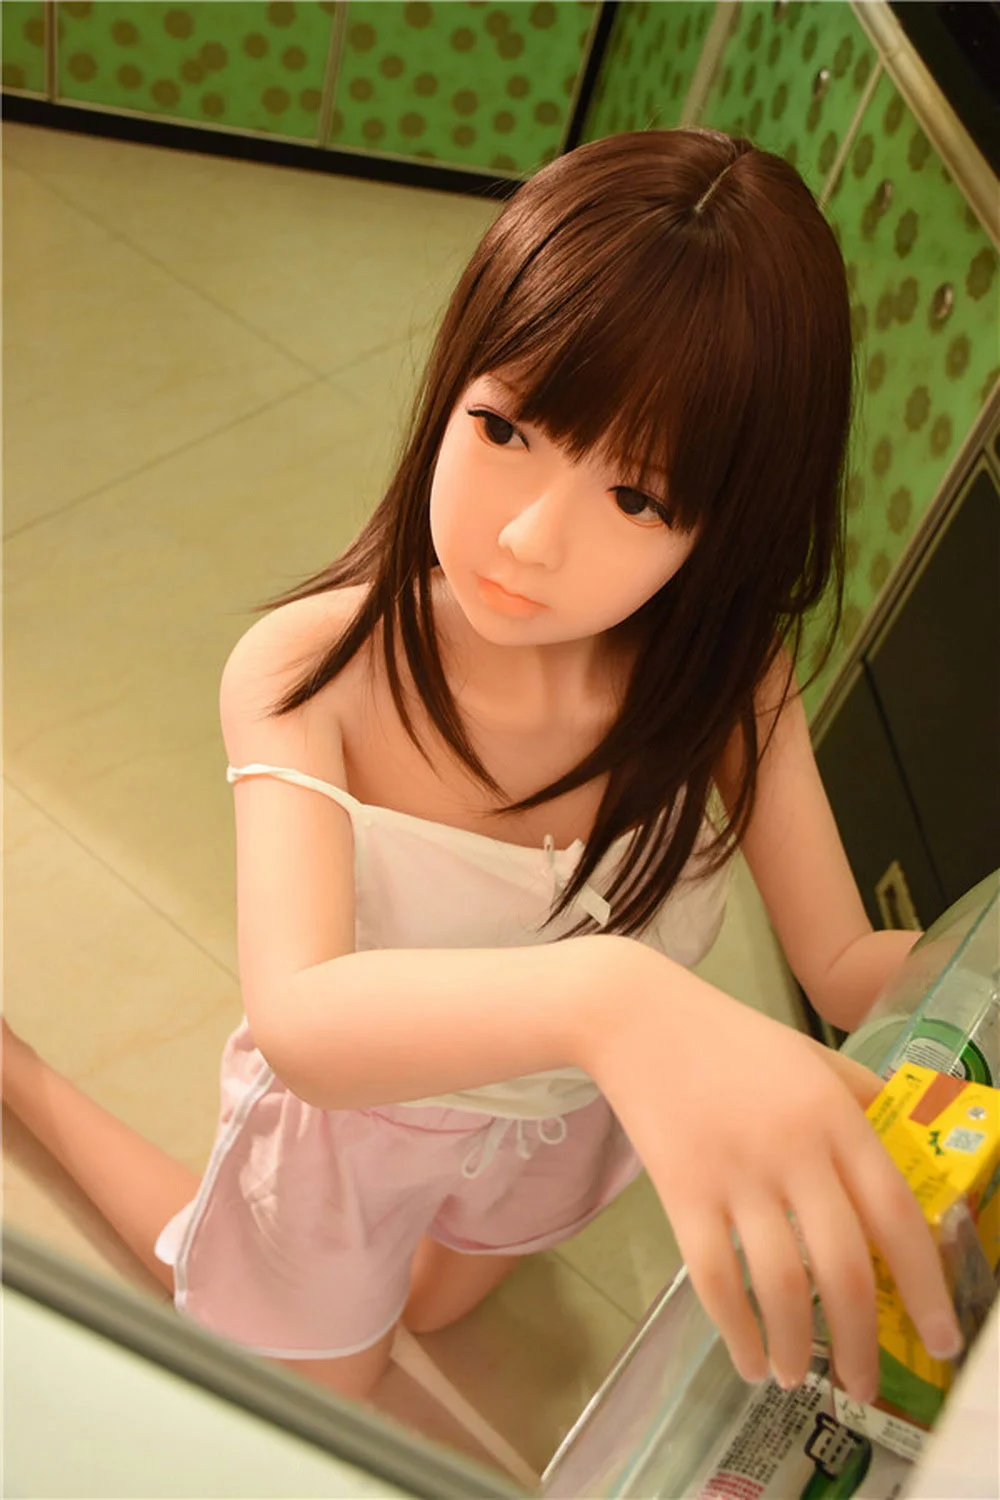 Hand holding sex doll in drink